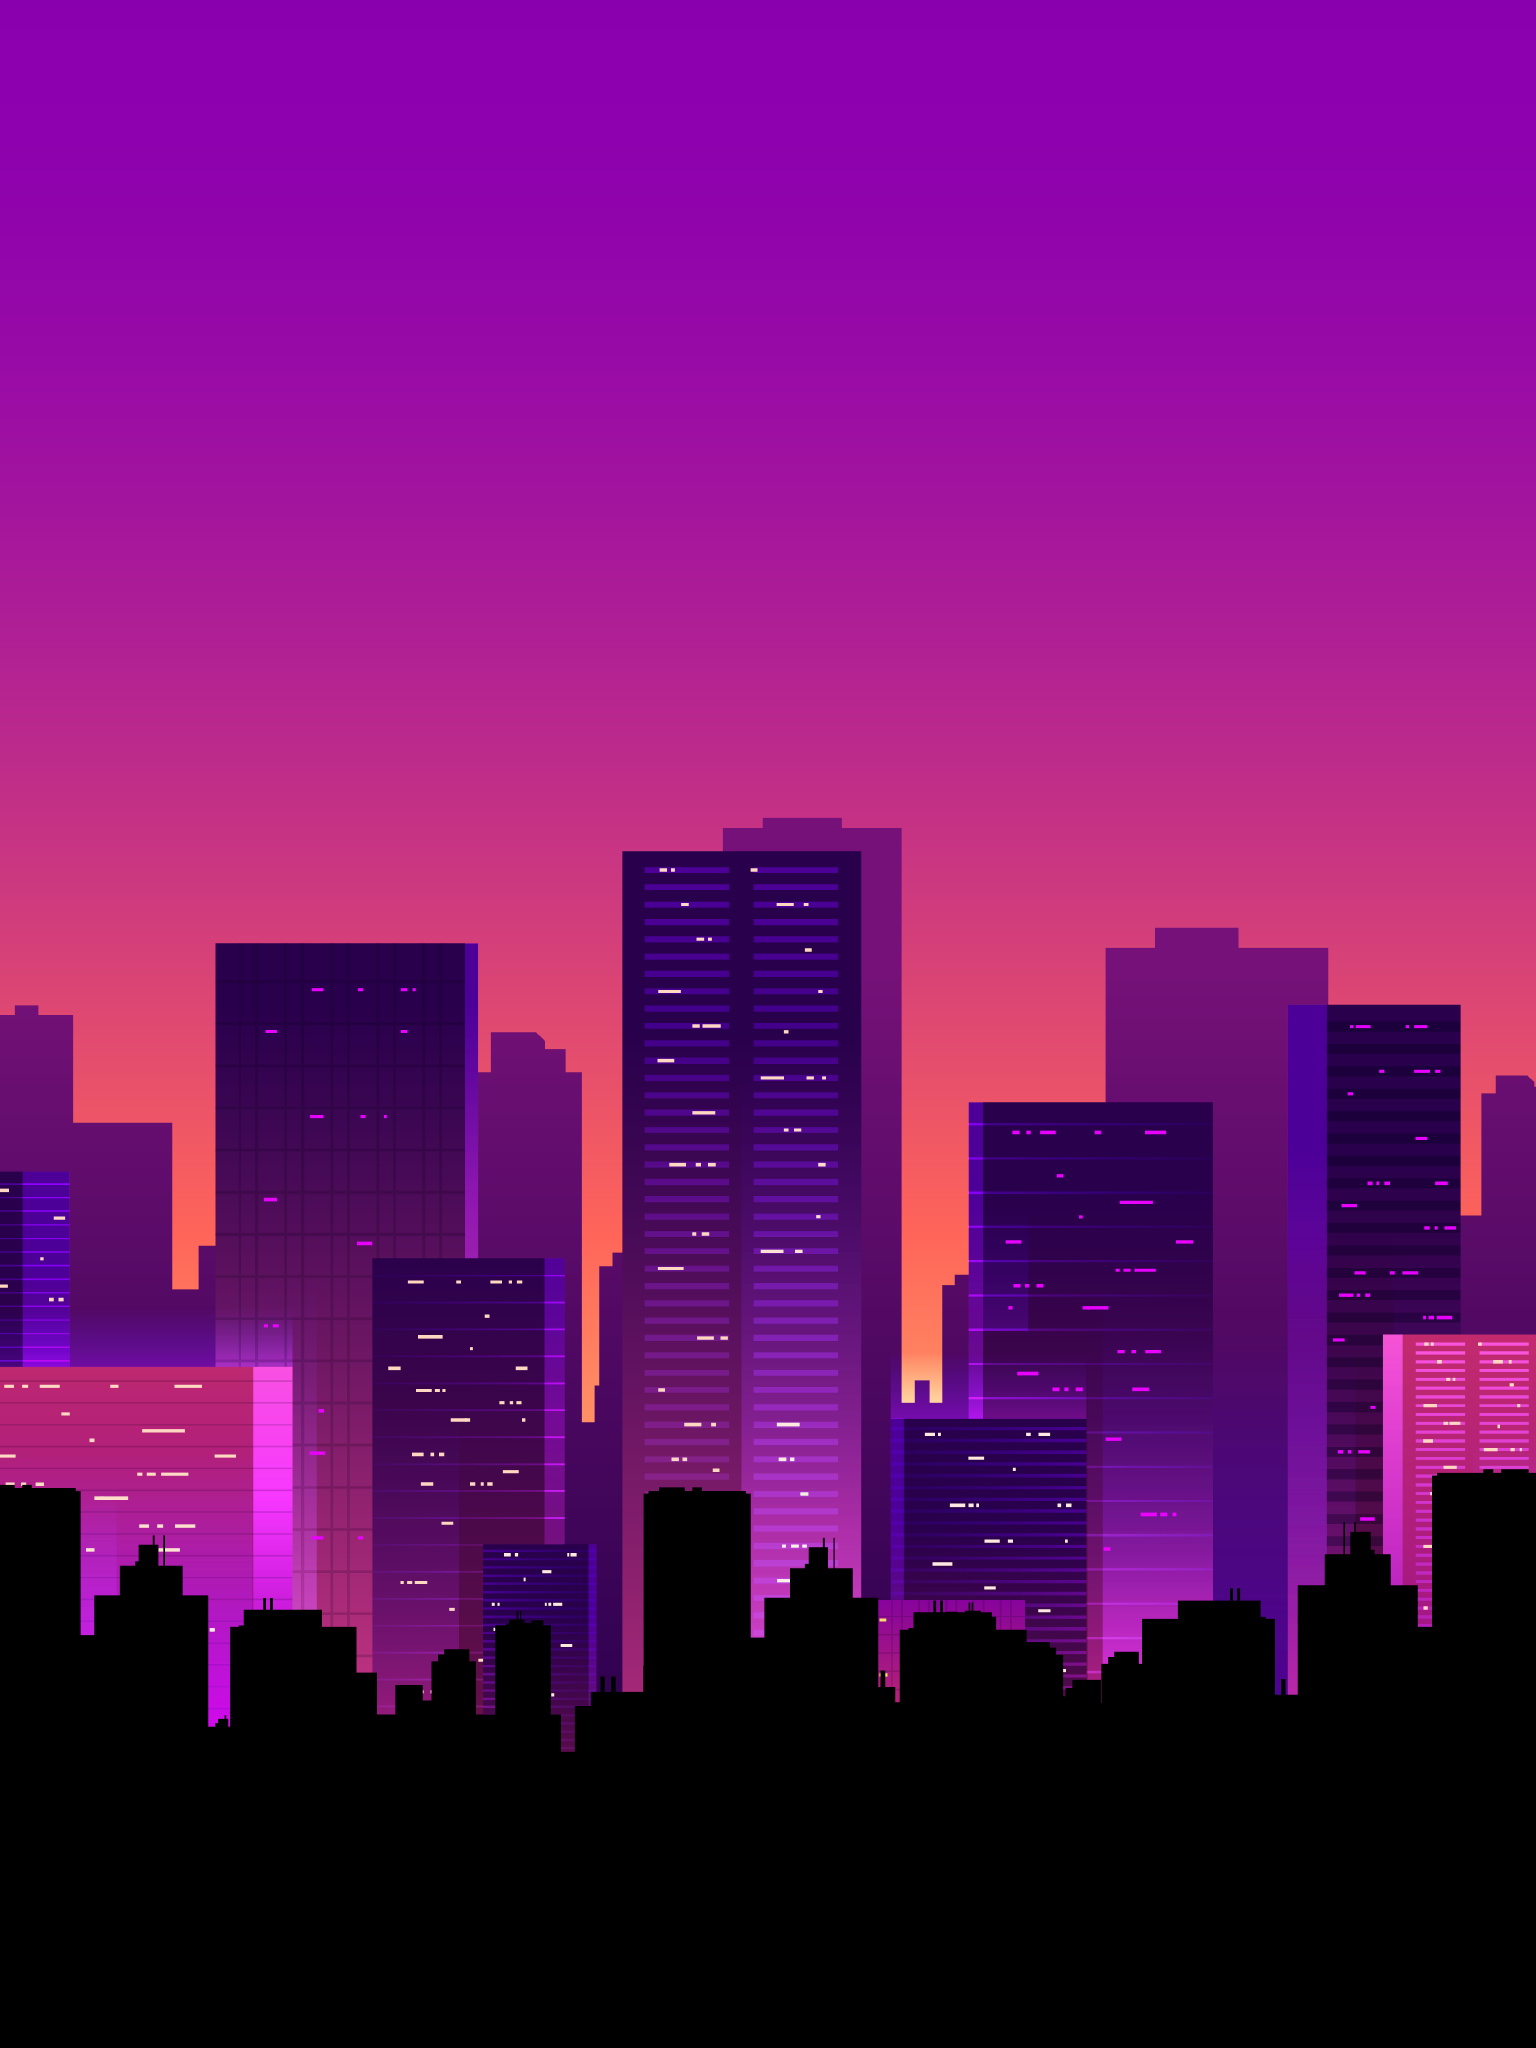 Ipad wallpapers - City Silhouette